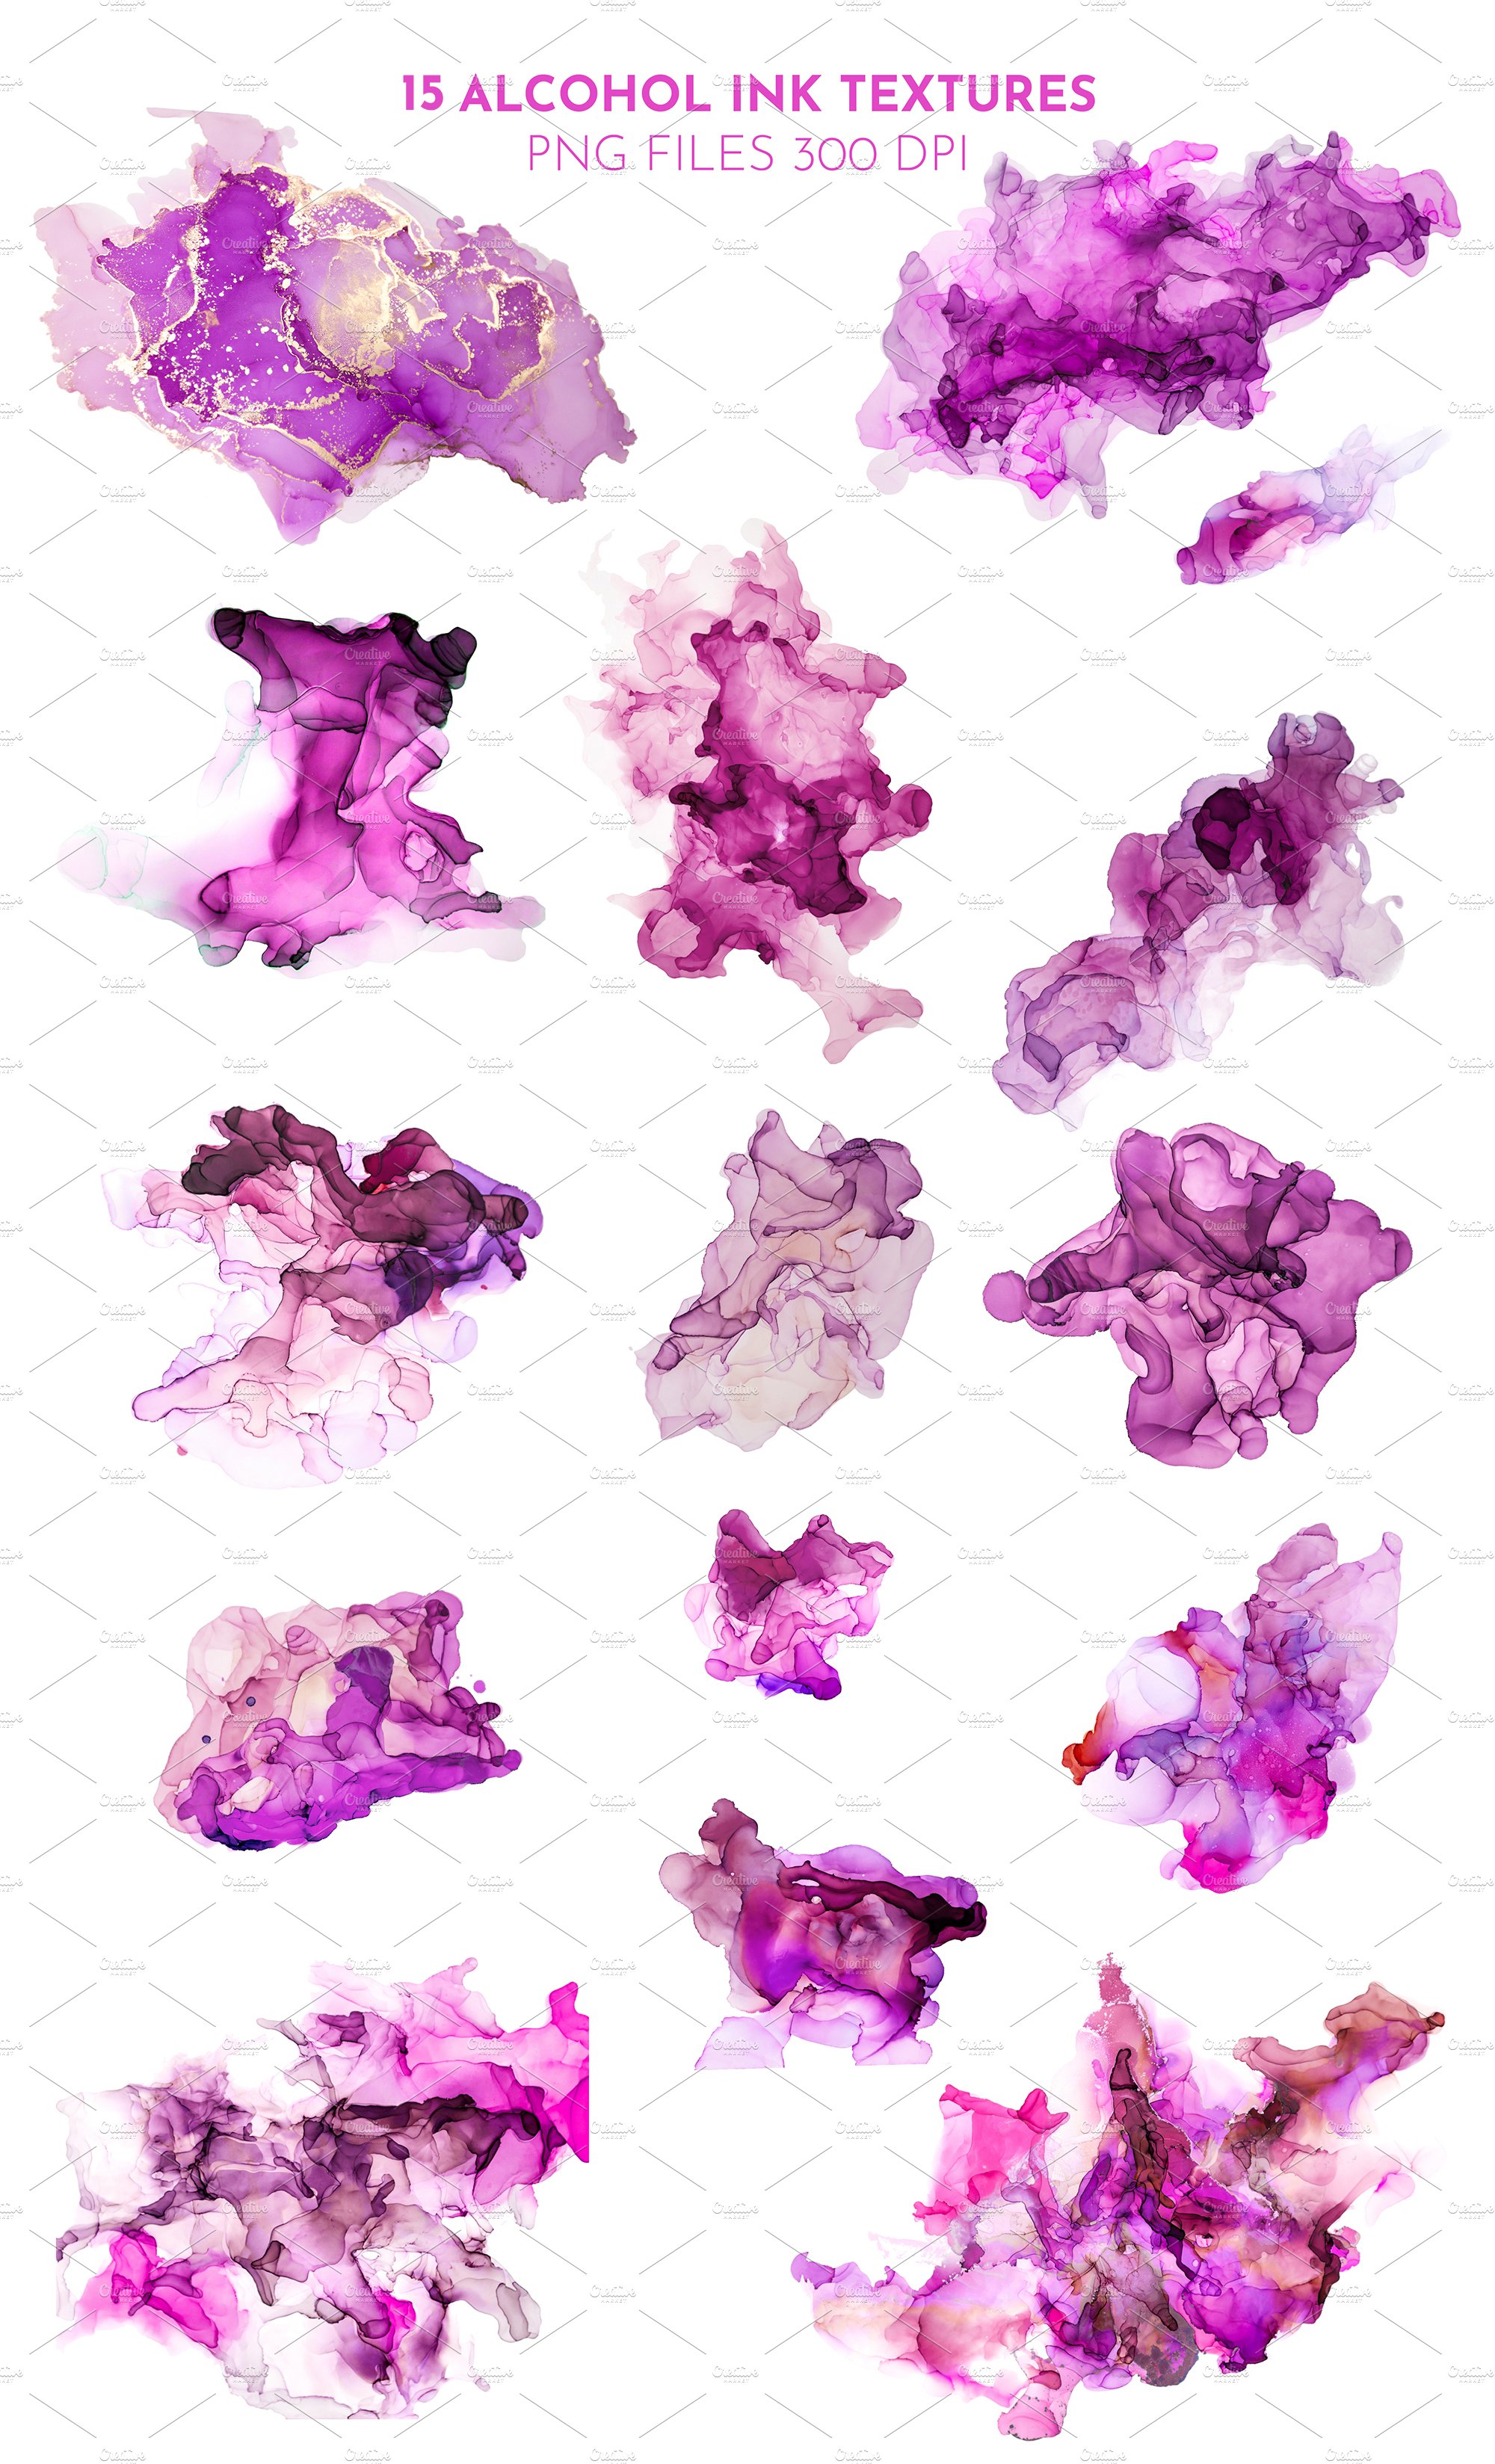 Purple & Pink Alcohol Ink Textures preview image.